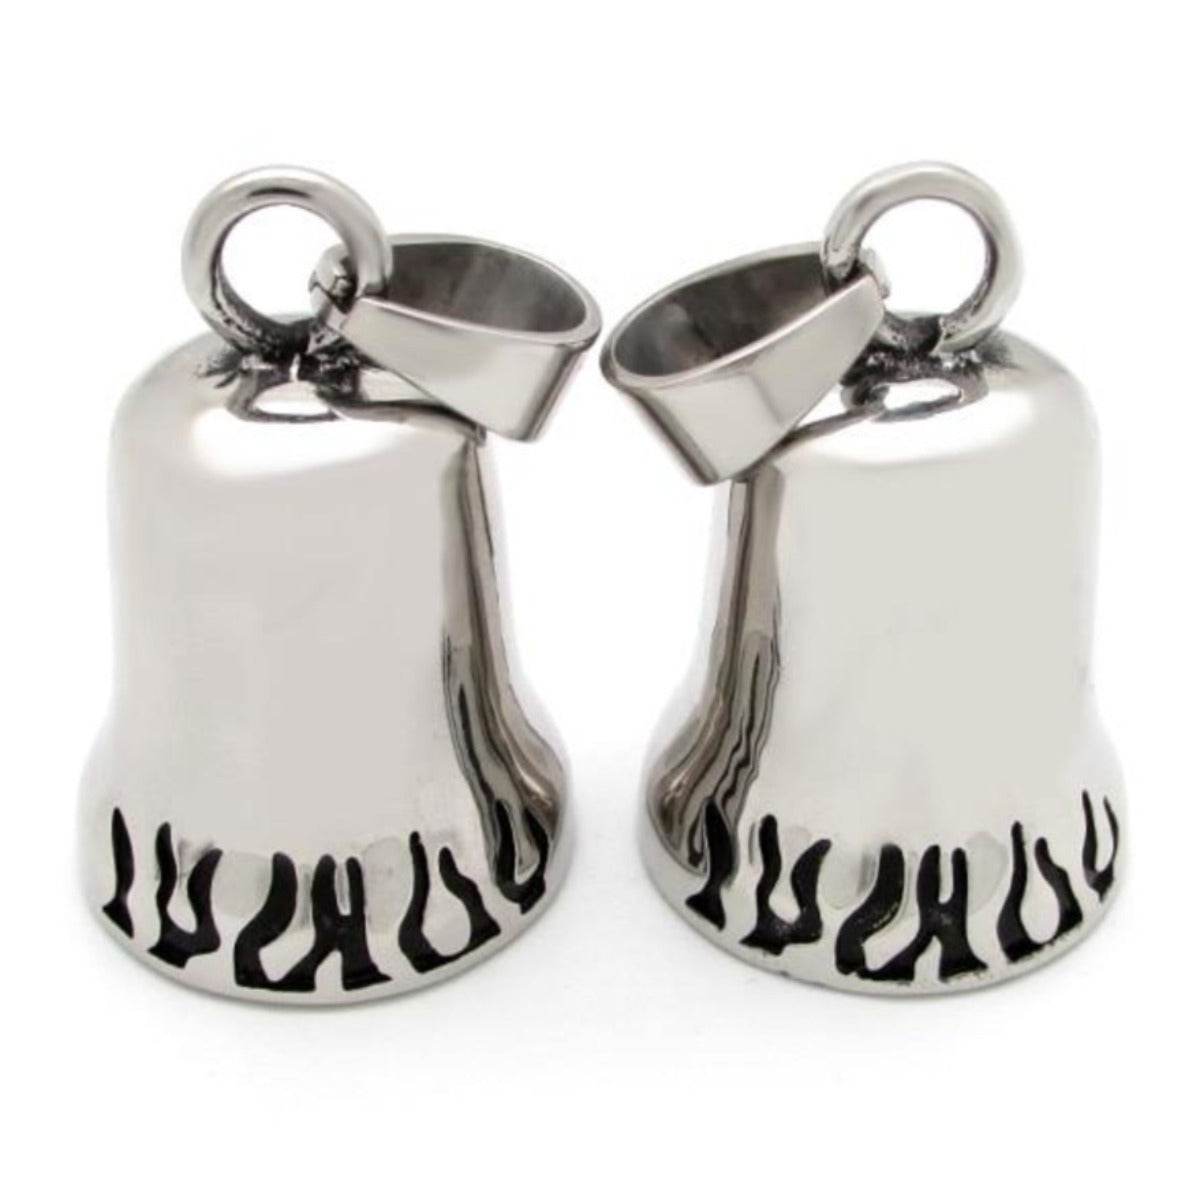 Two Stainless Steel Biker Spade Gremlin Bells with designs on them for biker protection.